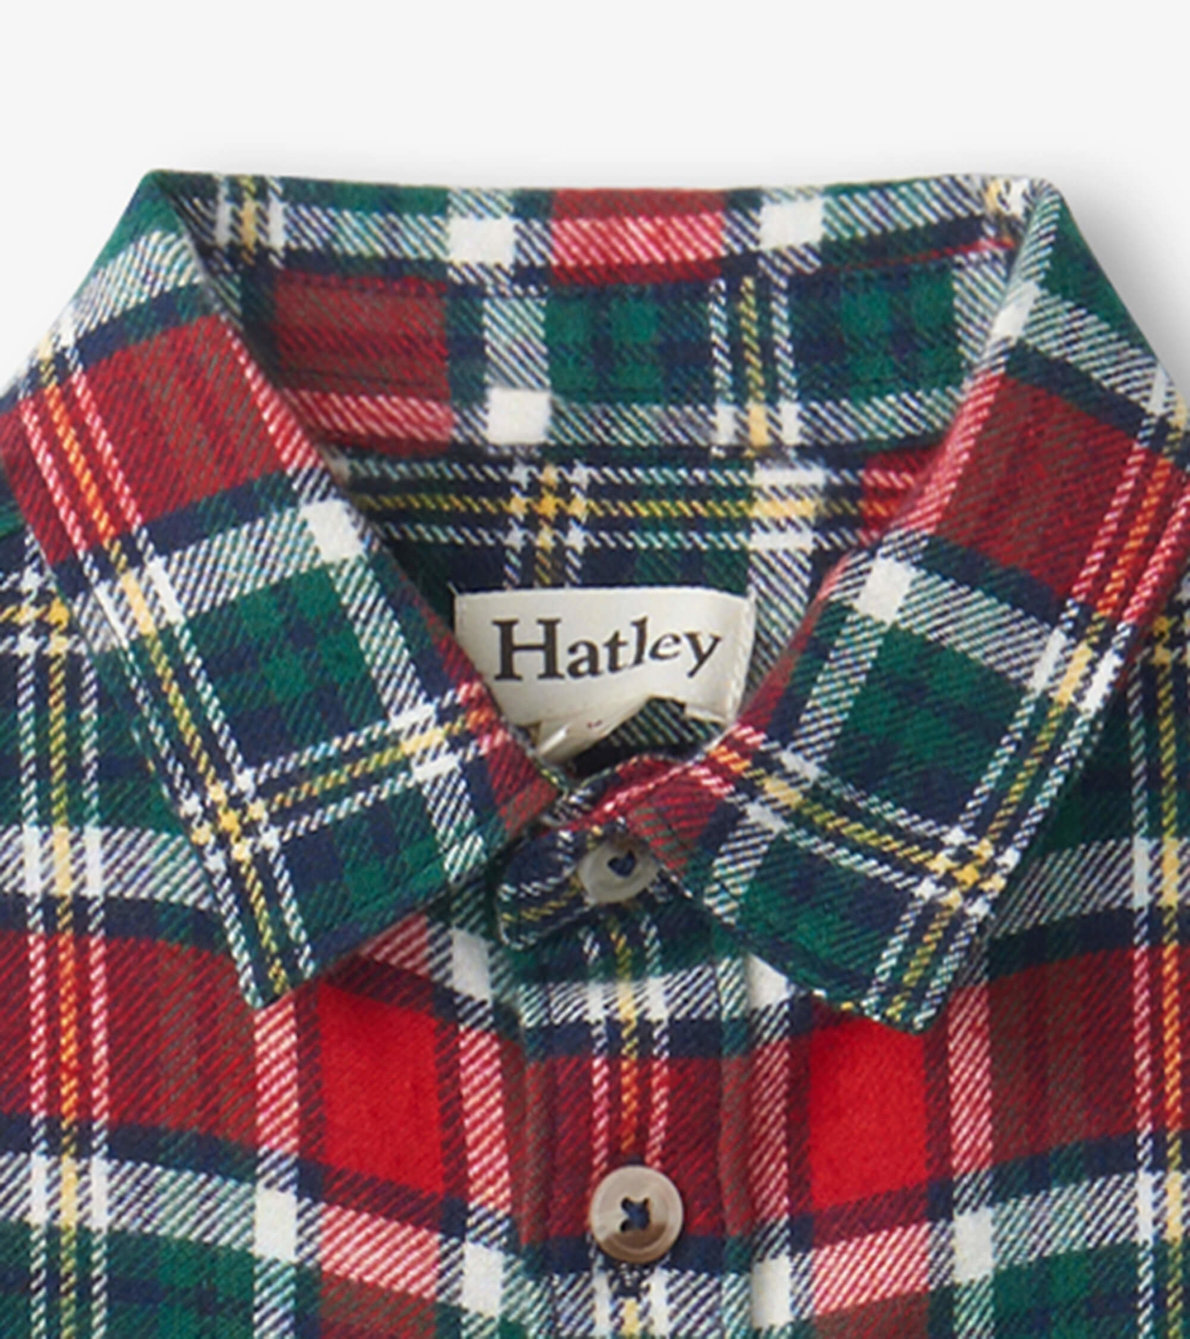 View larger image of Christmas Plaid Toddler Button Down Shirt